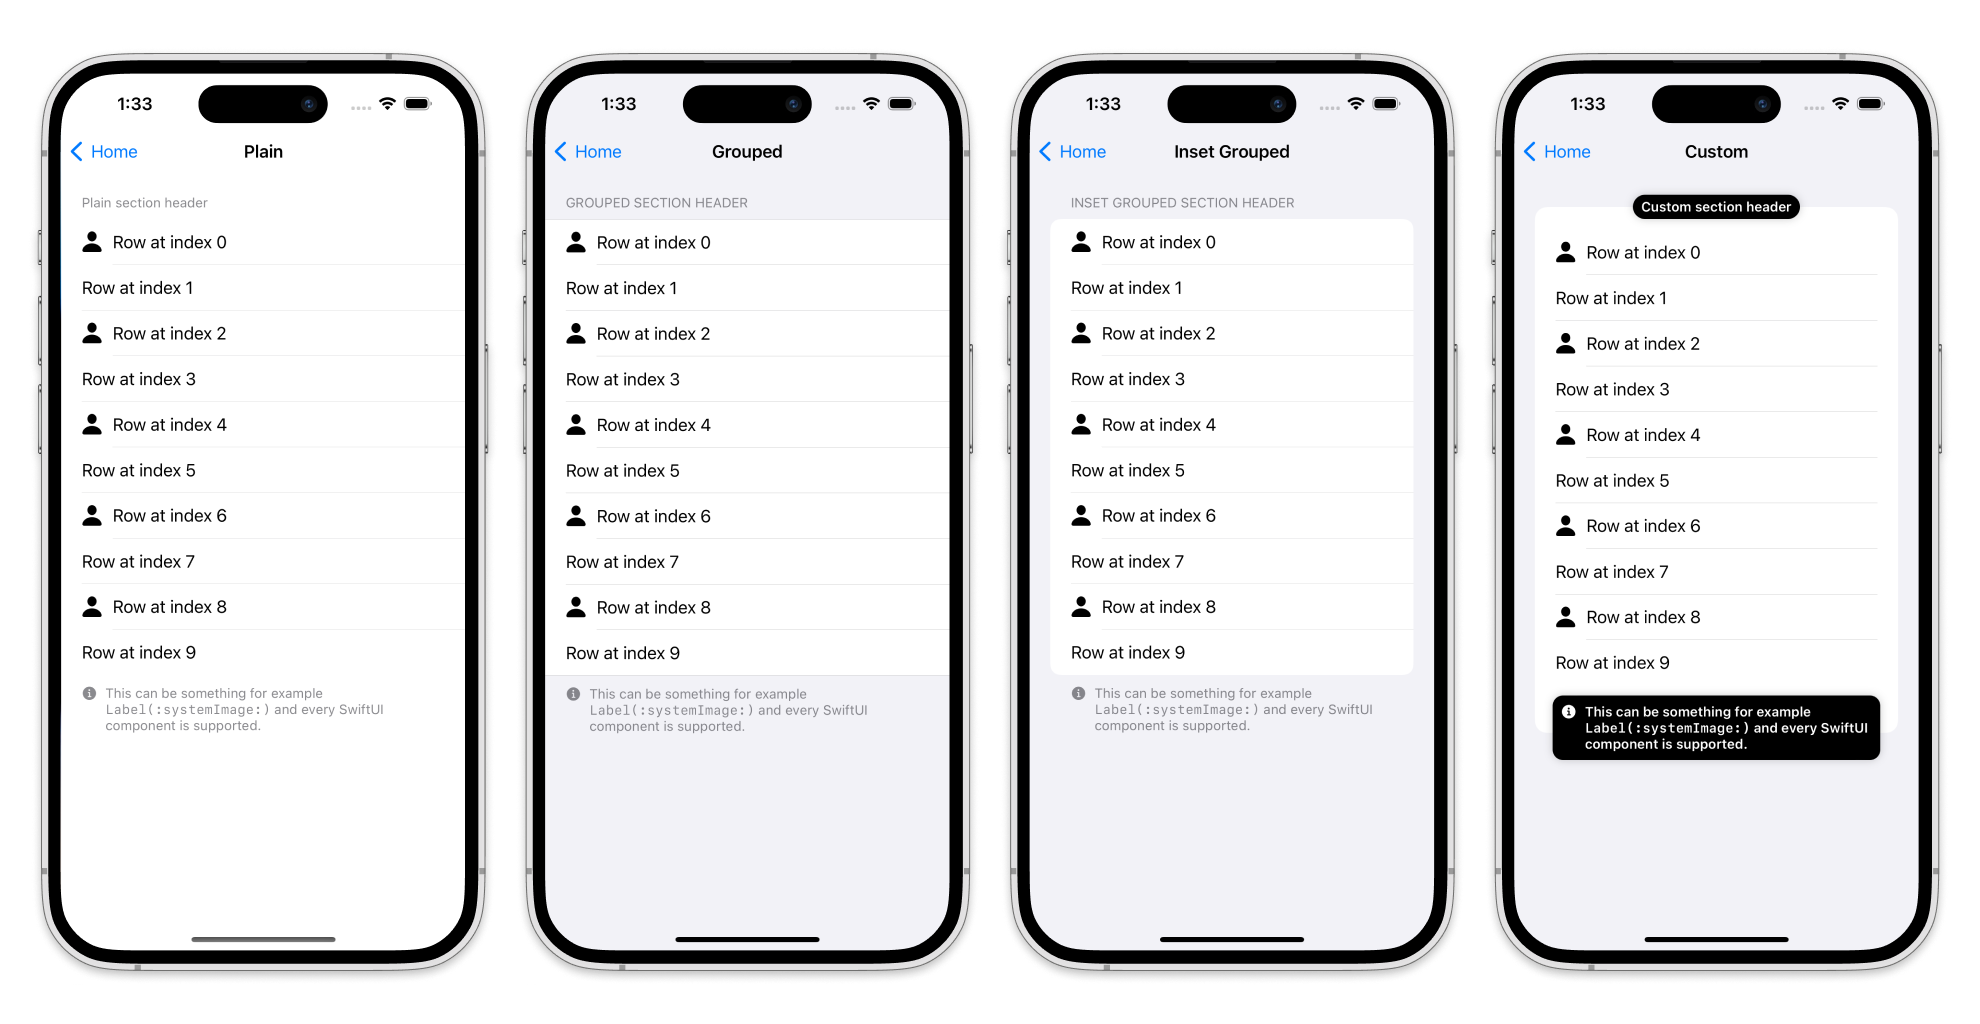 The preview of the `ScrollViewSectionKit` on iPhones 14 Pro Max. The 1st one shows plain style. The 2nd one shows grouped style. The 3rd one shows inset grouped style. The 4th one shows custom style.